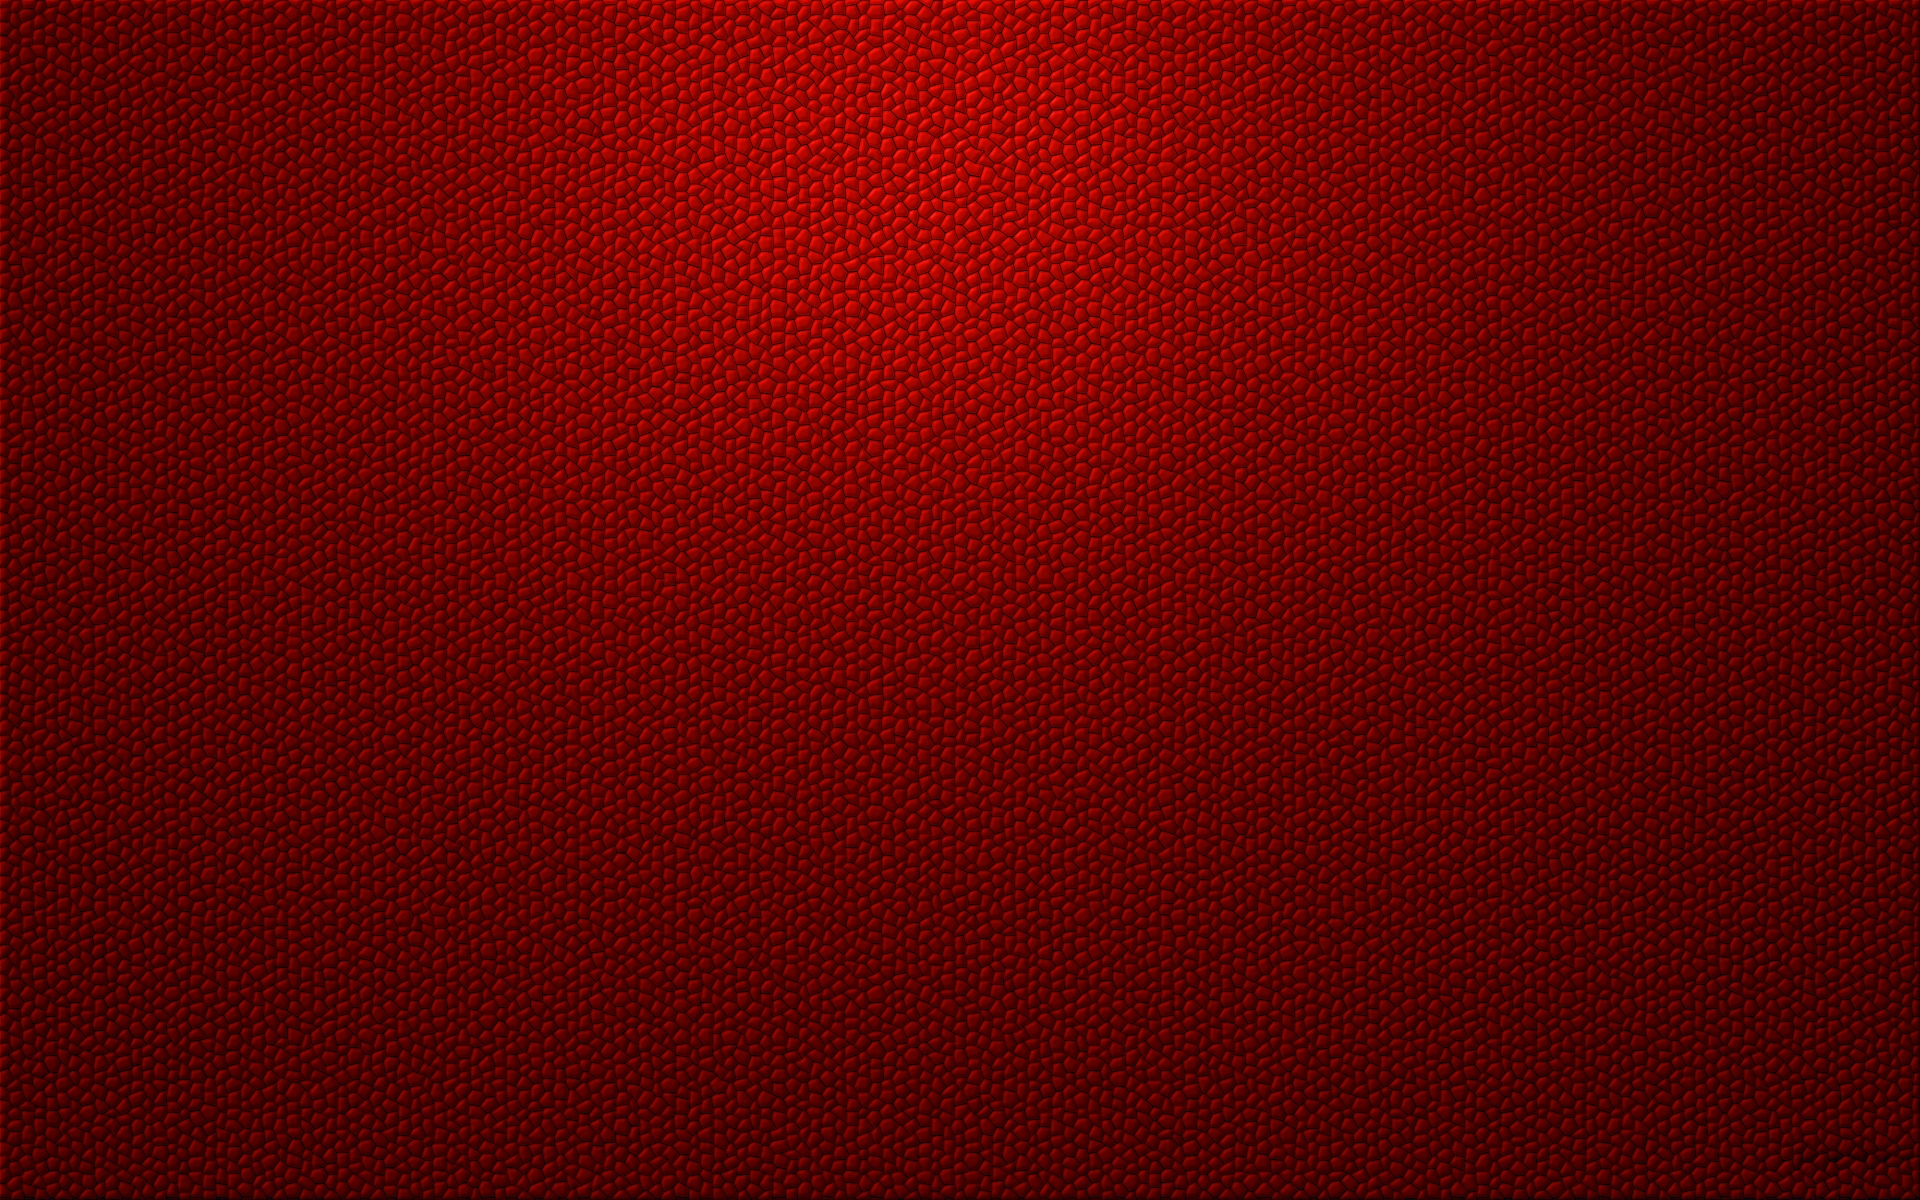 rubber texture background, texture, rubber, download photo, background, texture